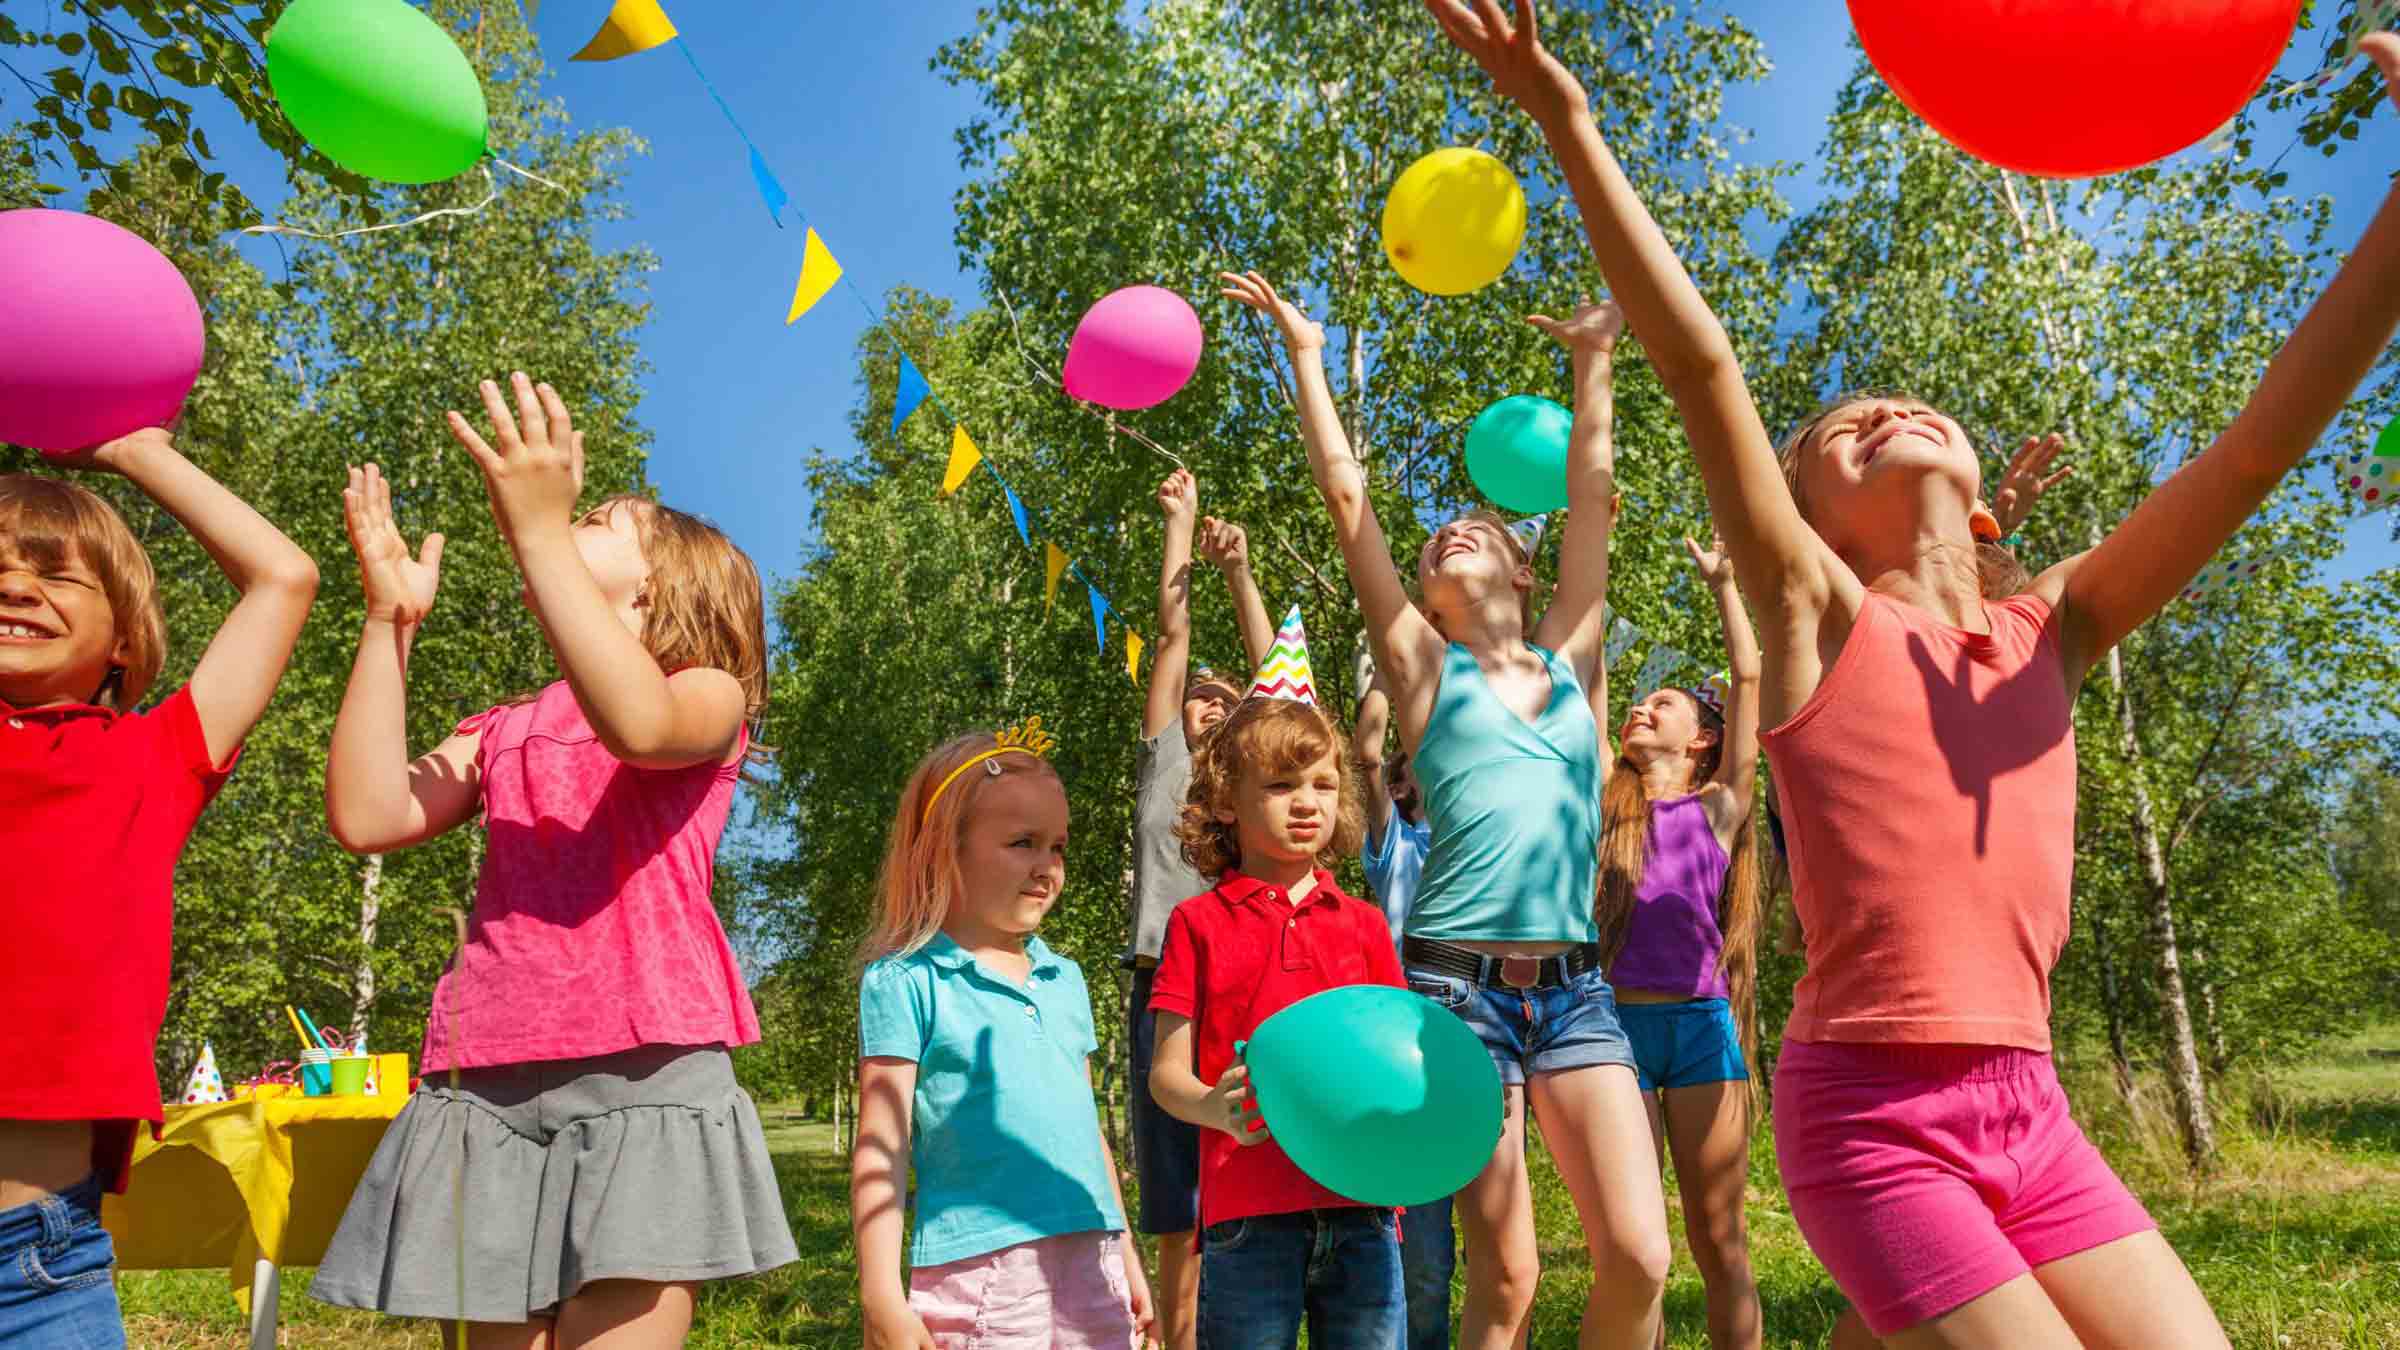 Children playing with balloons at the park